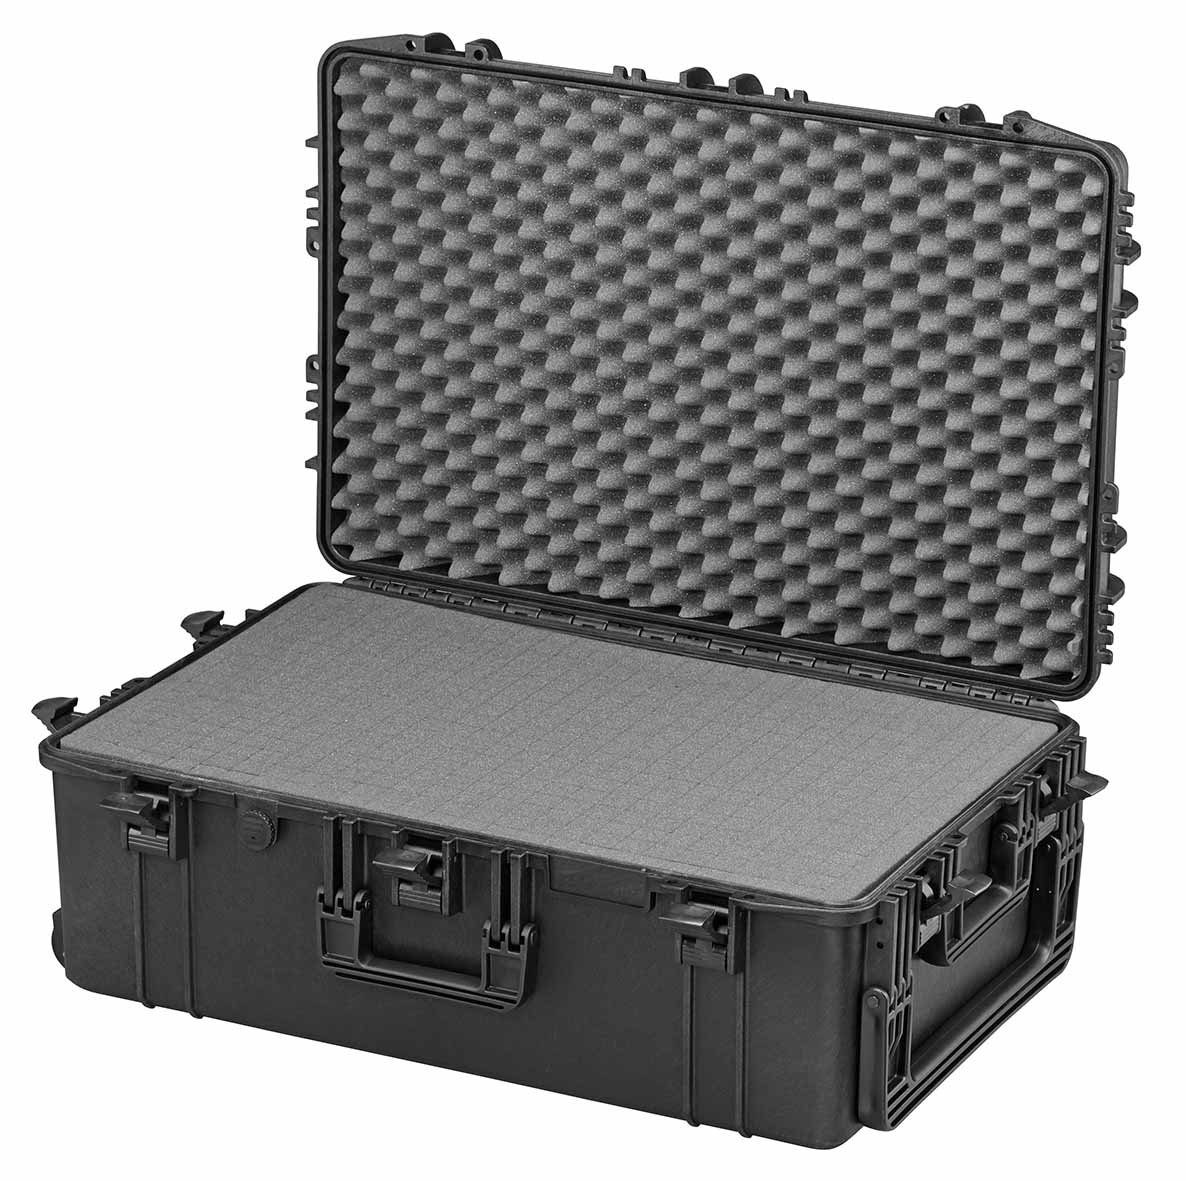 100 Litre Wheeled Waterproof Plastic Protective Case - With or Without Foam